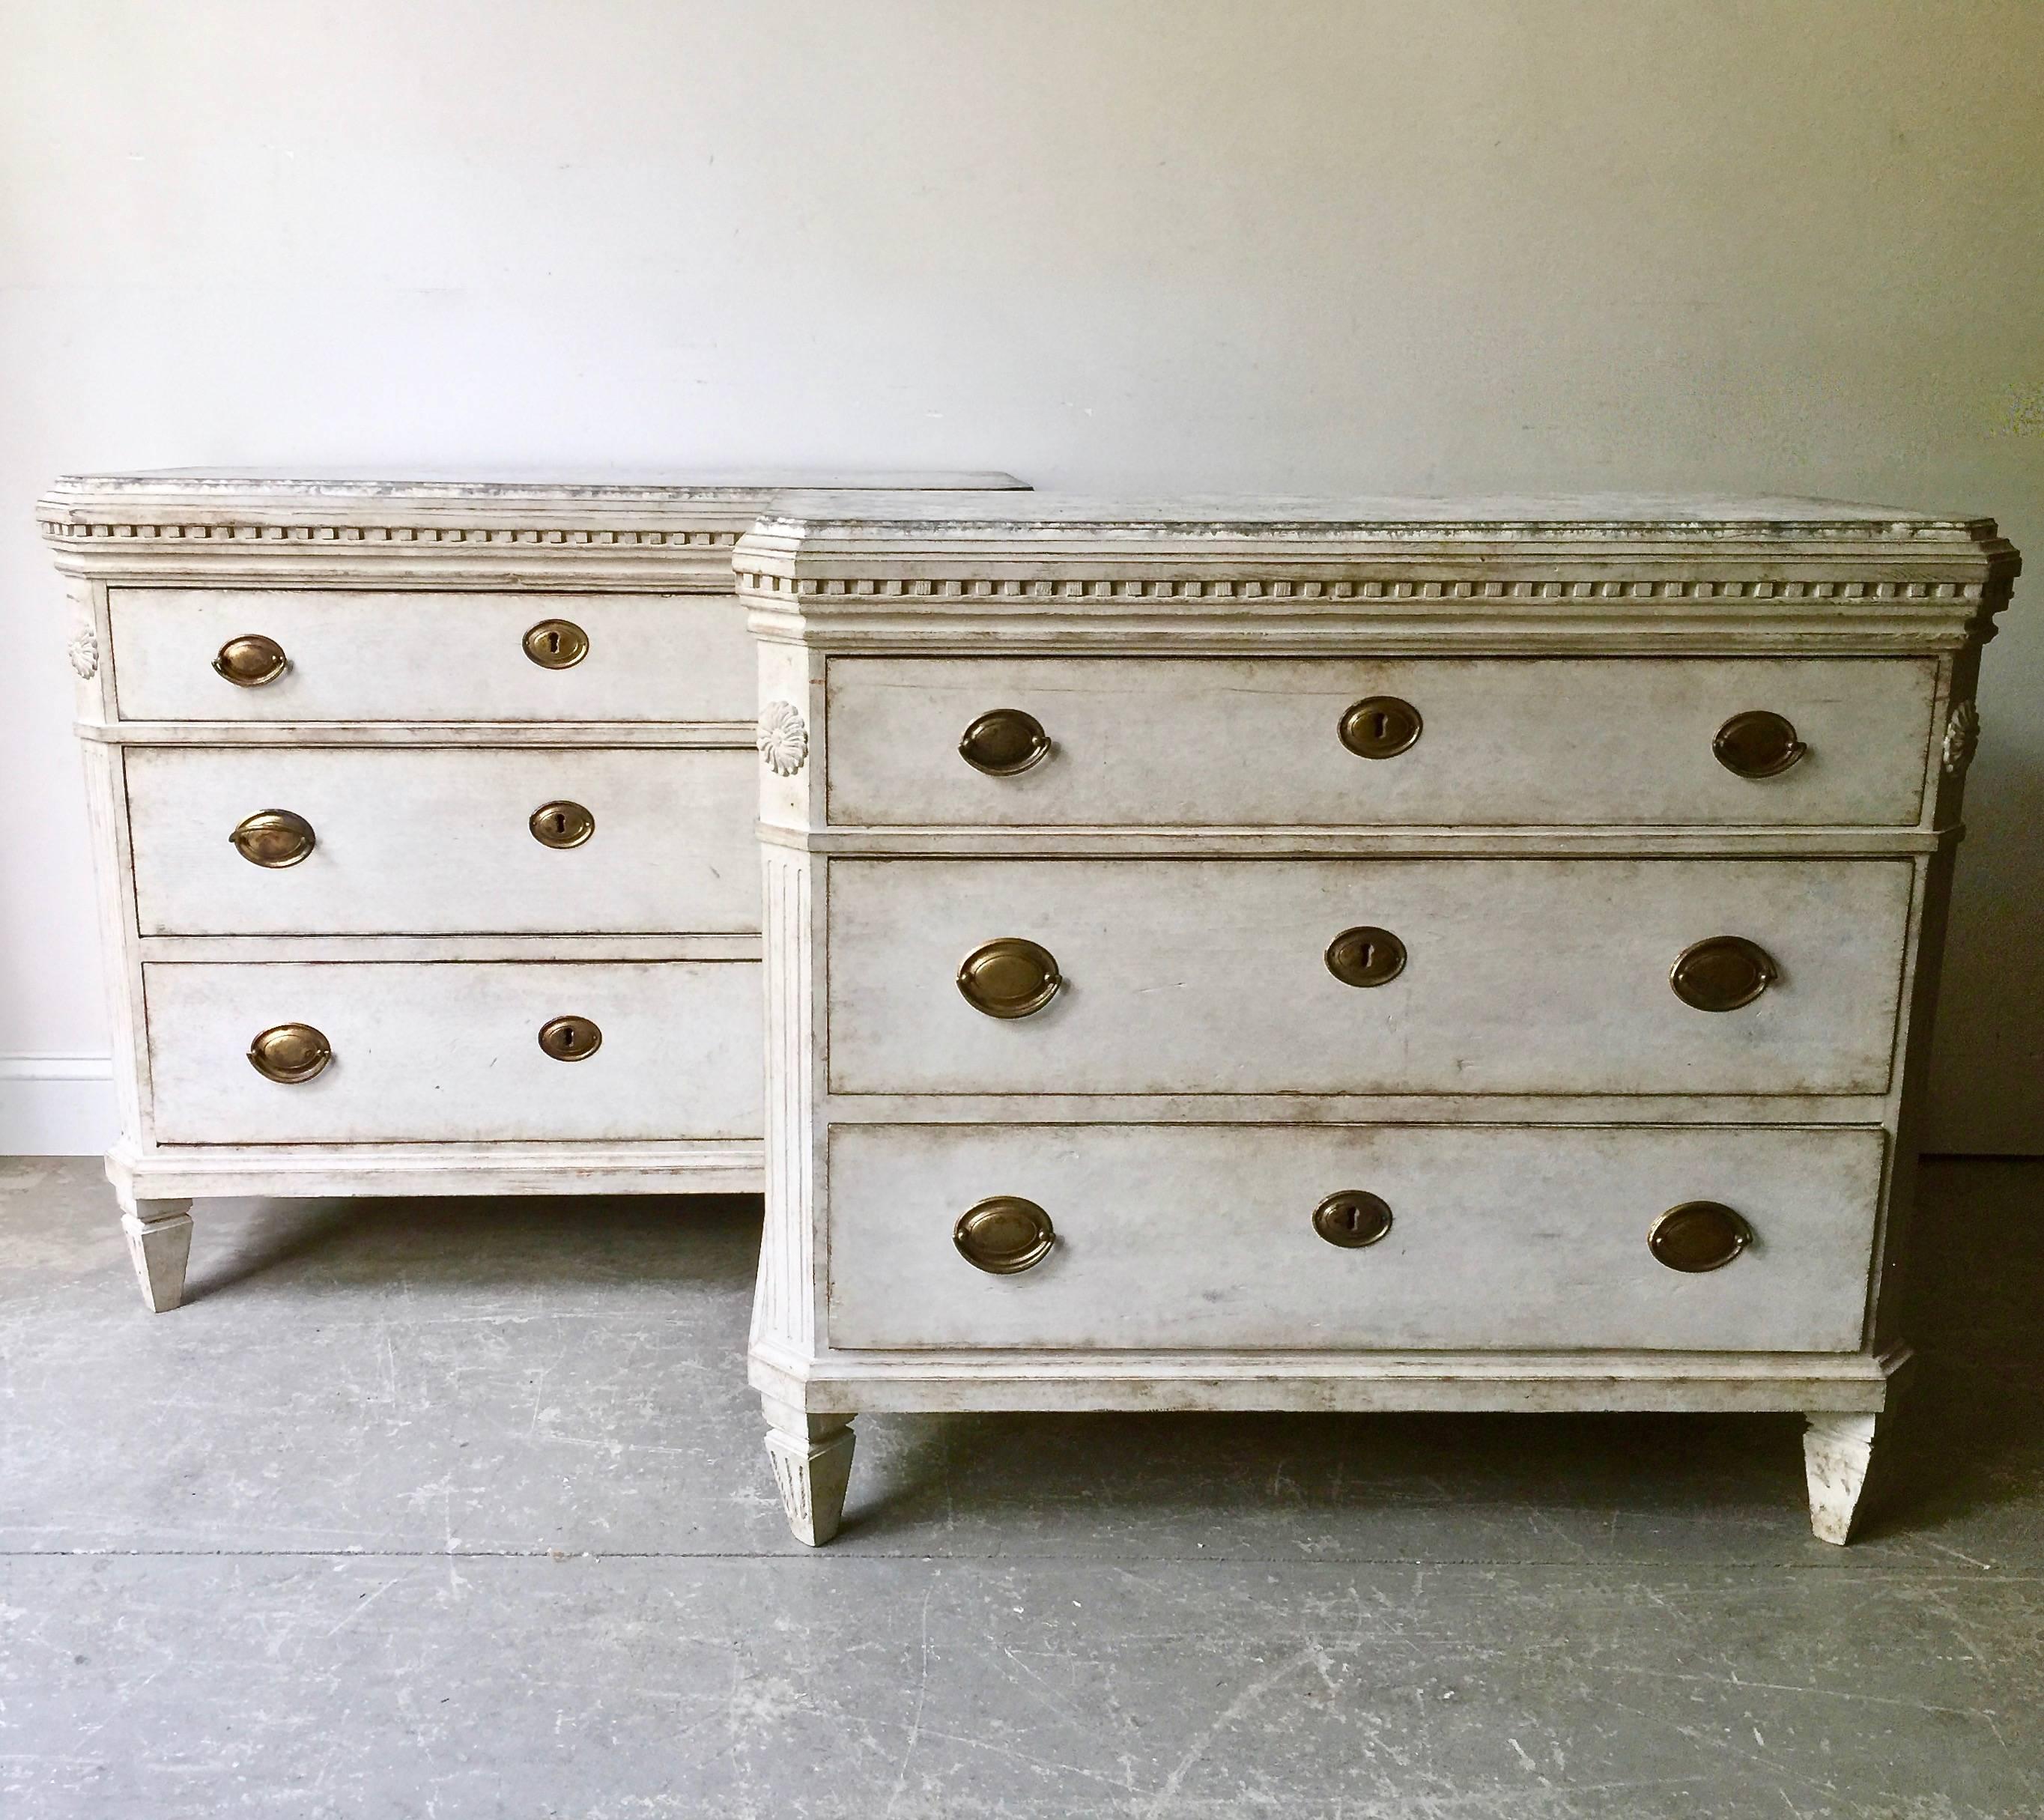 A very fine pair of 19th century, Swedish Gustavian style chest of drawers with very handsome original hardware and exceptional floral carvings on each reeded corner posts under the marblesized wood shaped top. A truly special pair of chest, Sweden,